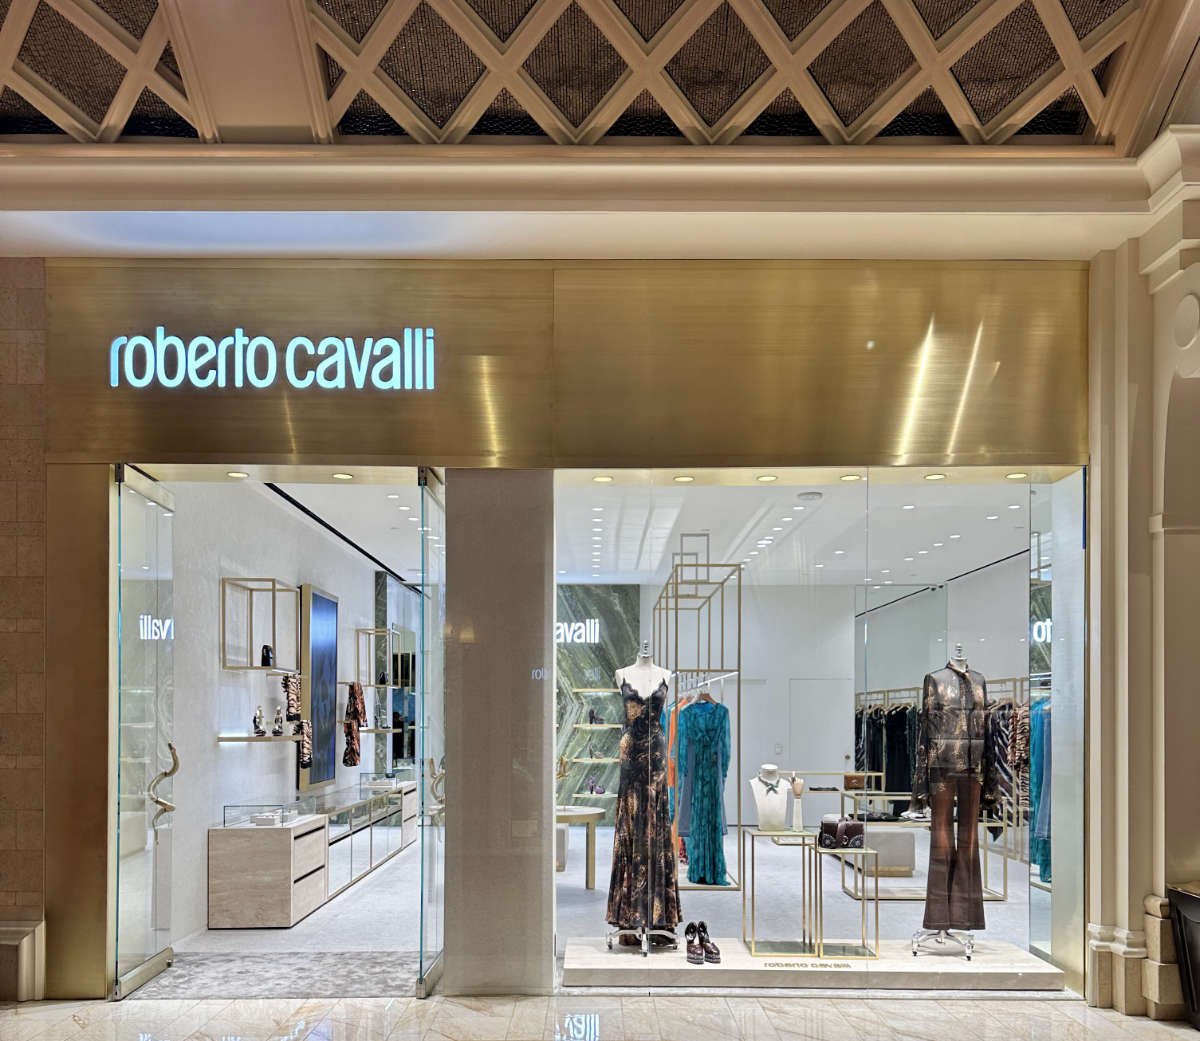 Roberto Cavalli’s Retail Expansion Continues In The USA And Bahrain